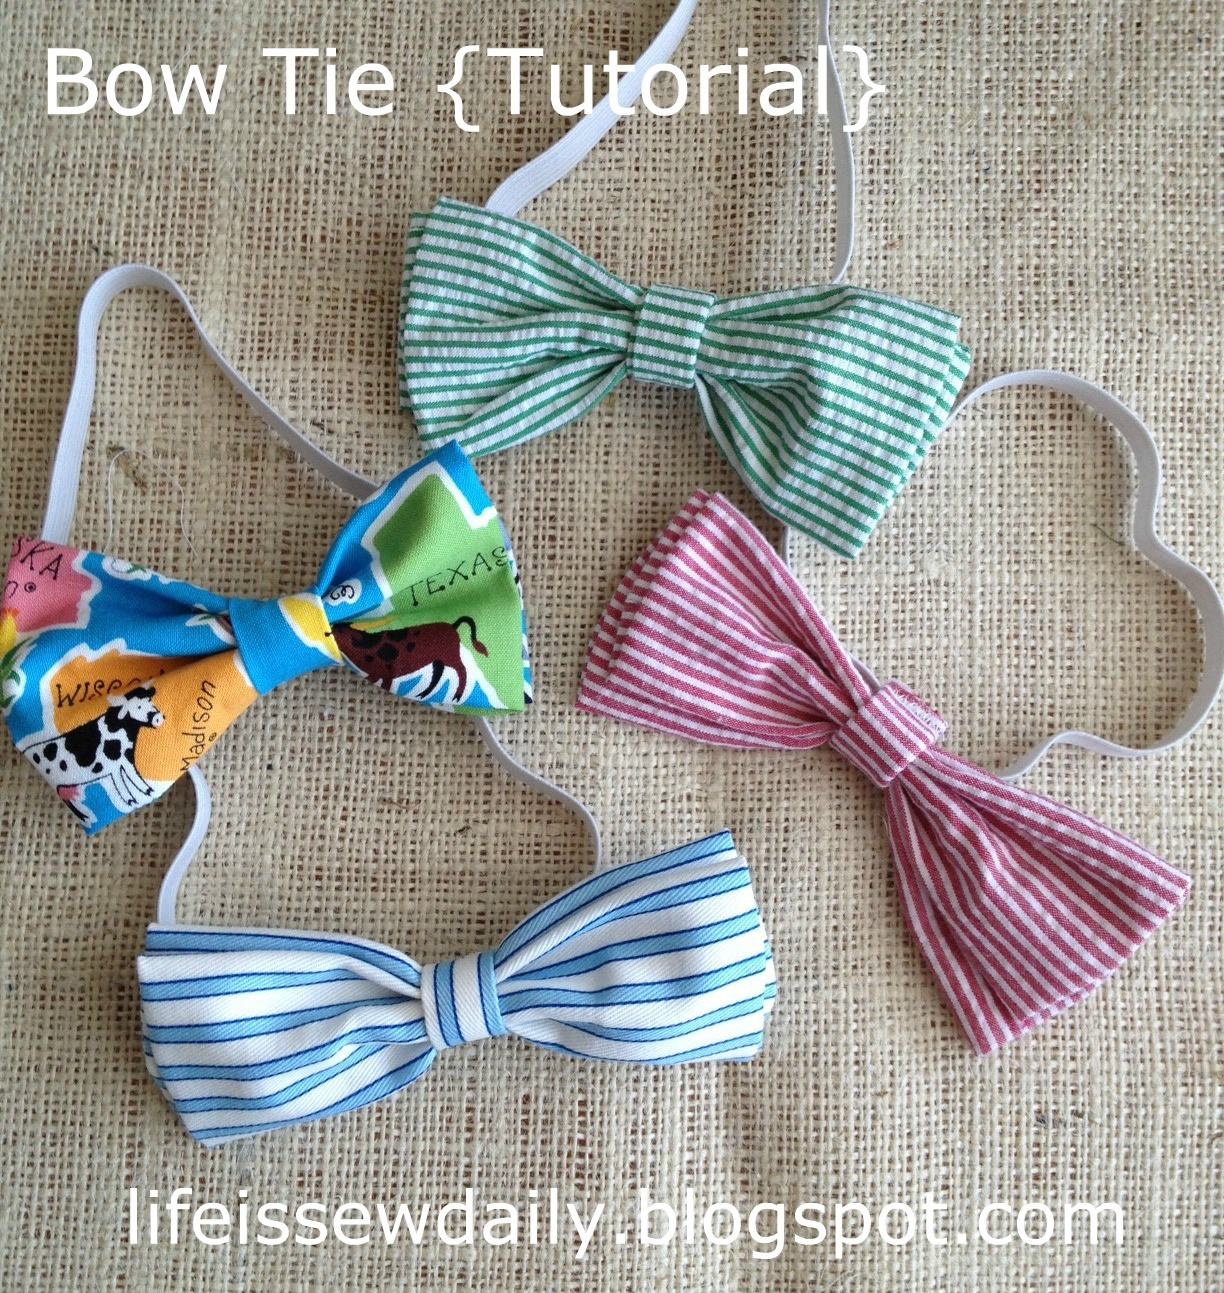 DIY Toddler Bow Tie
 Life is Sew Daily Bow Ties for Baby & Toddler Tutorial